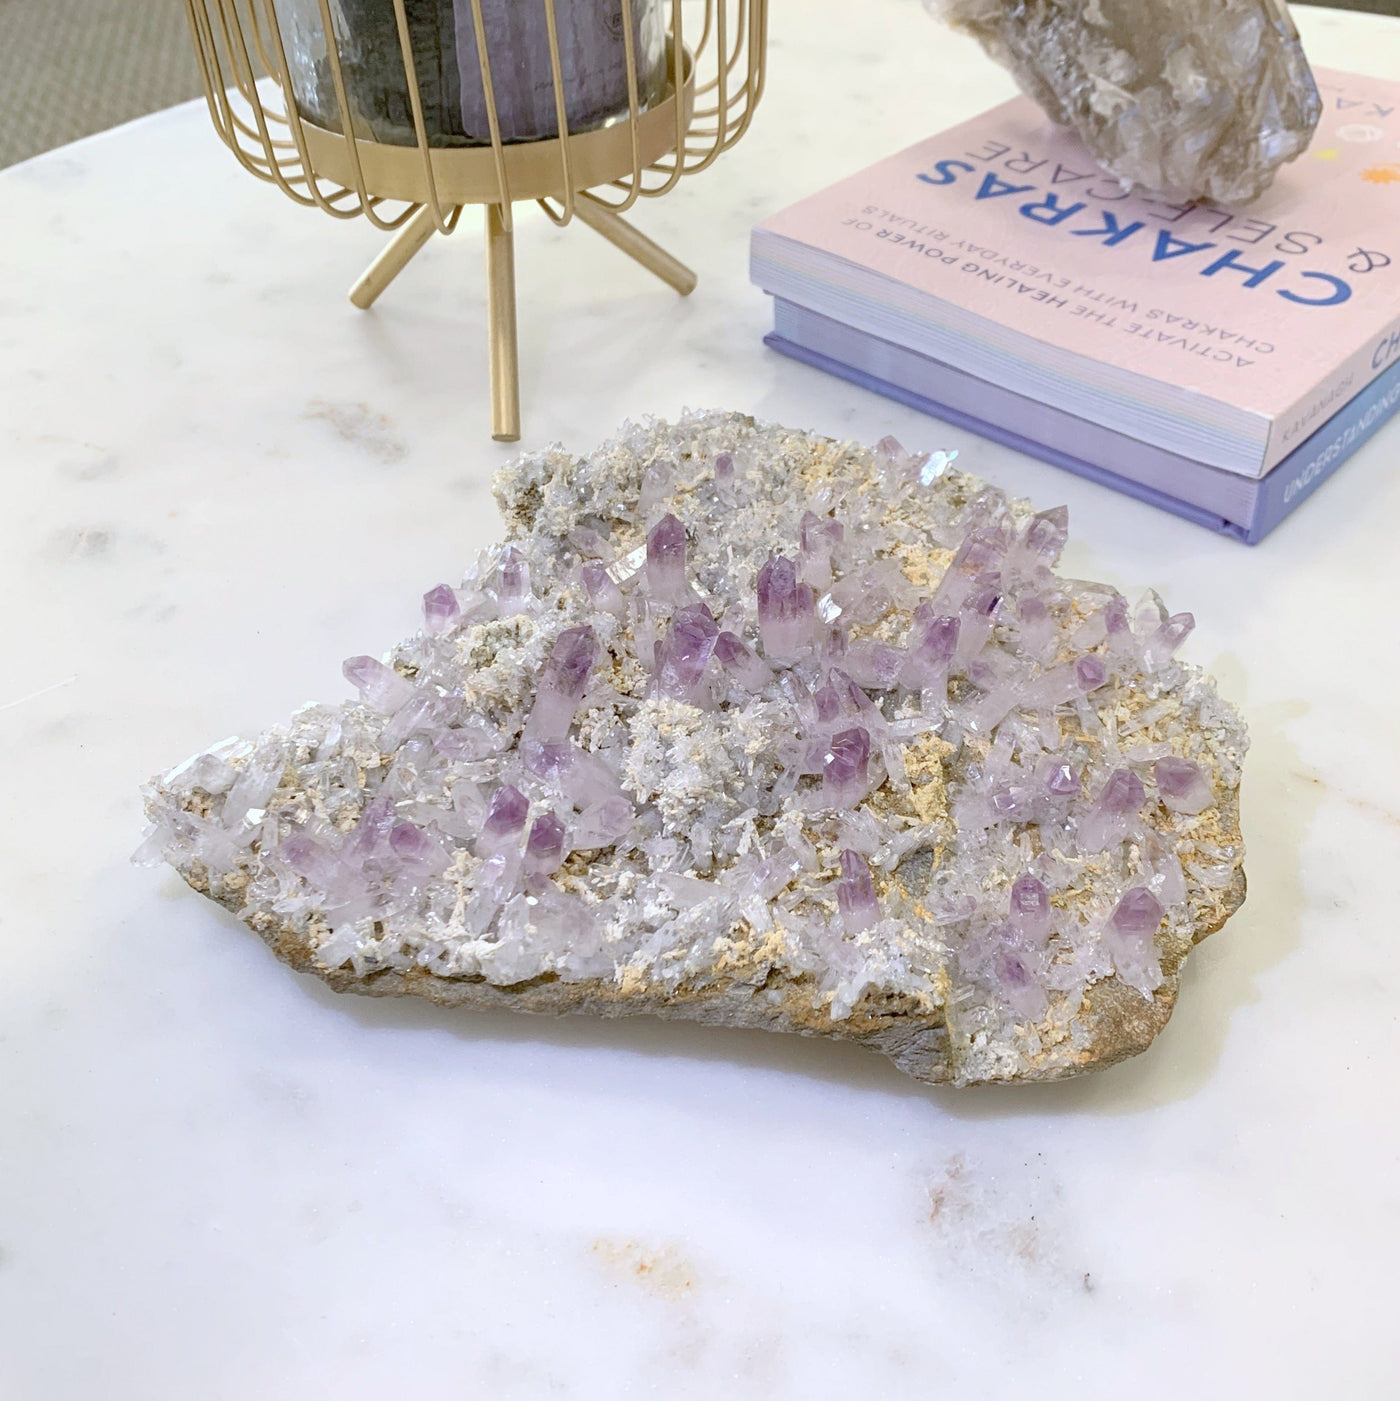 veracruz amethyst on white coffee table next to books and candle